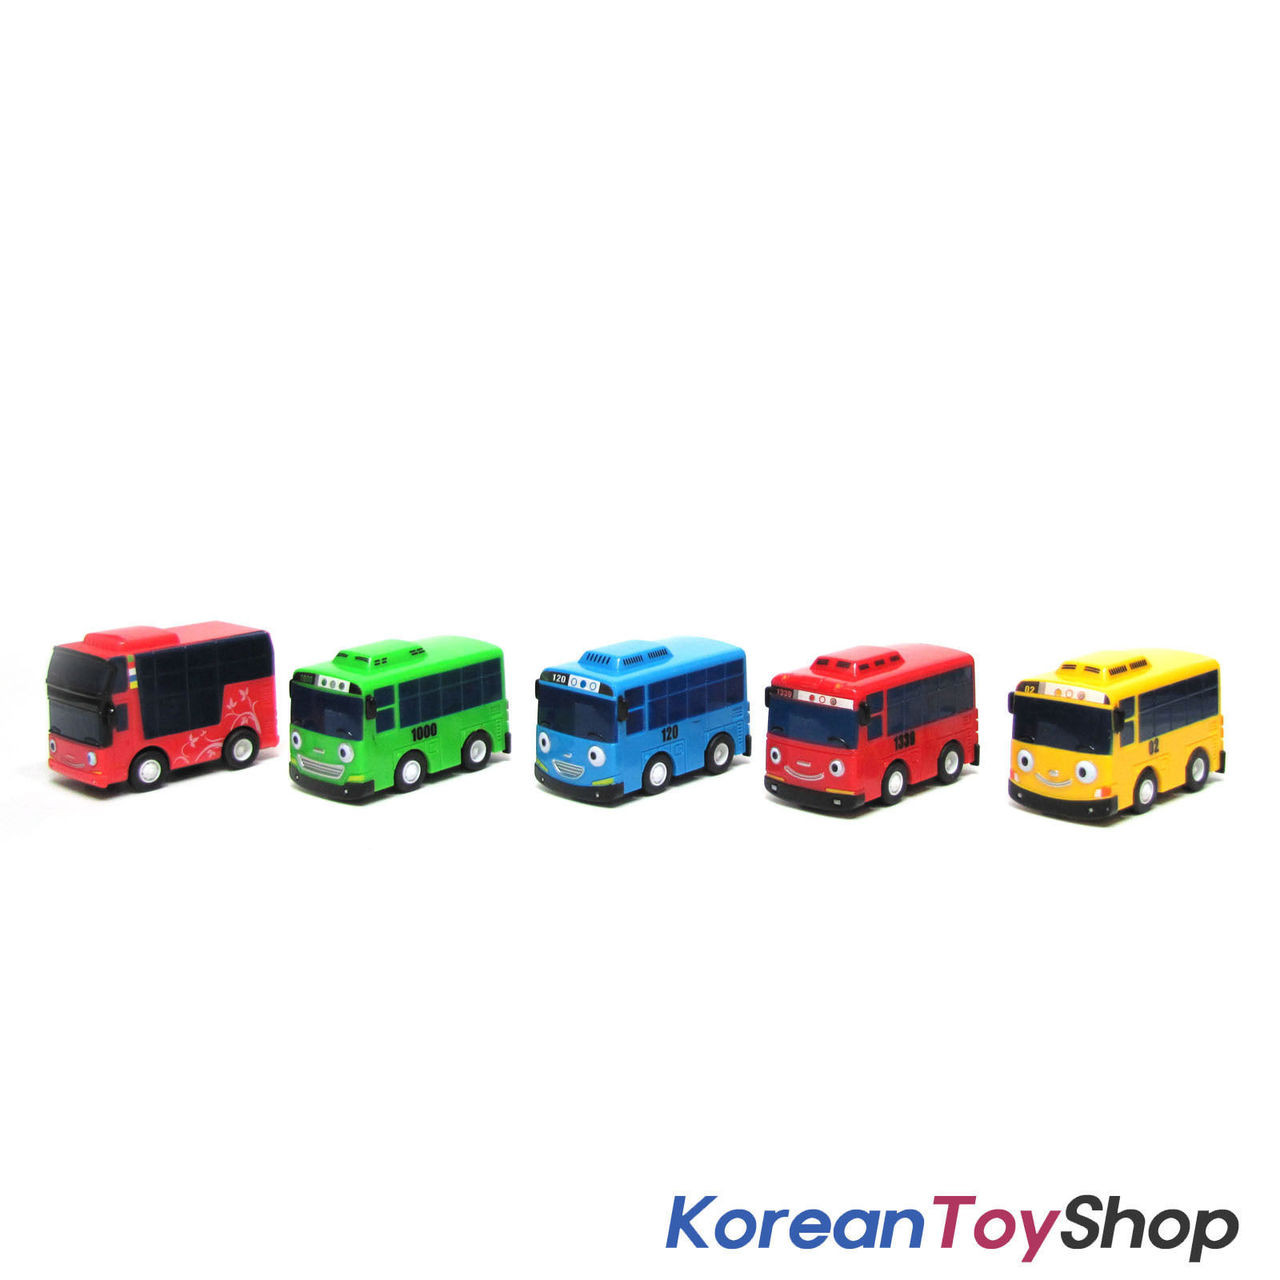 toy little cars